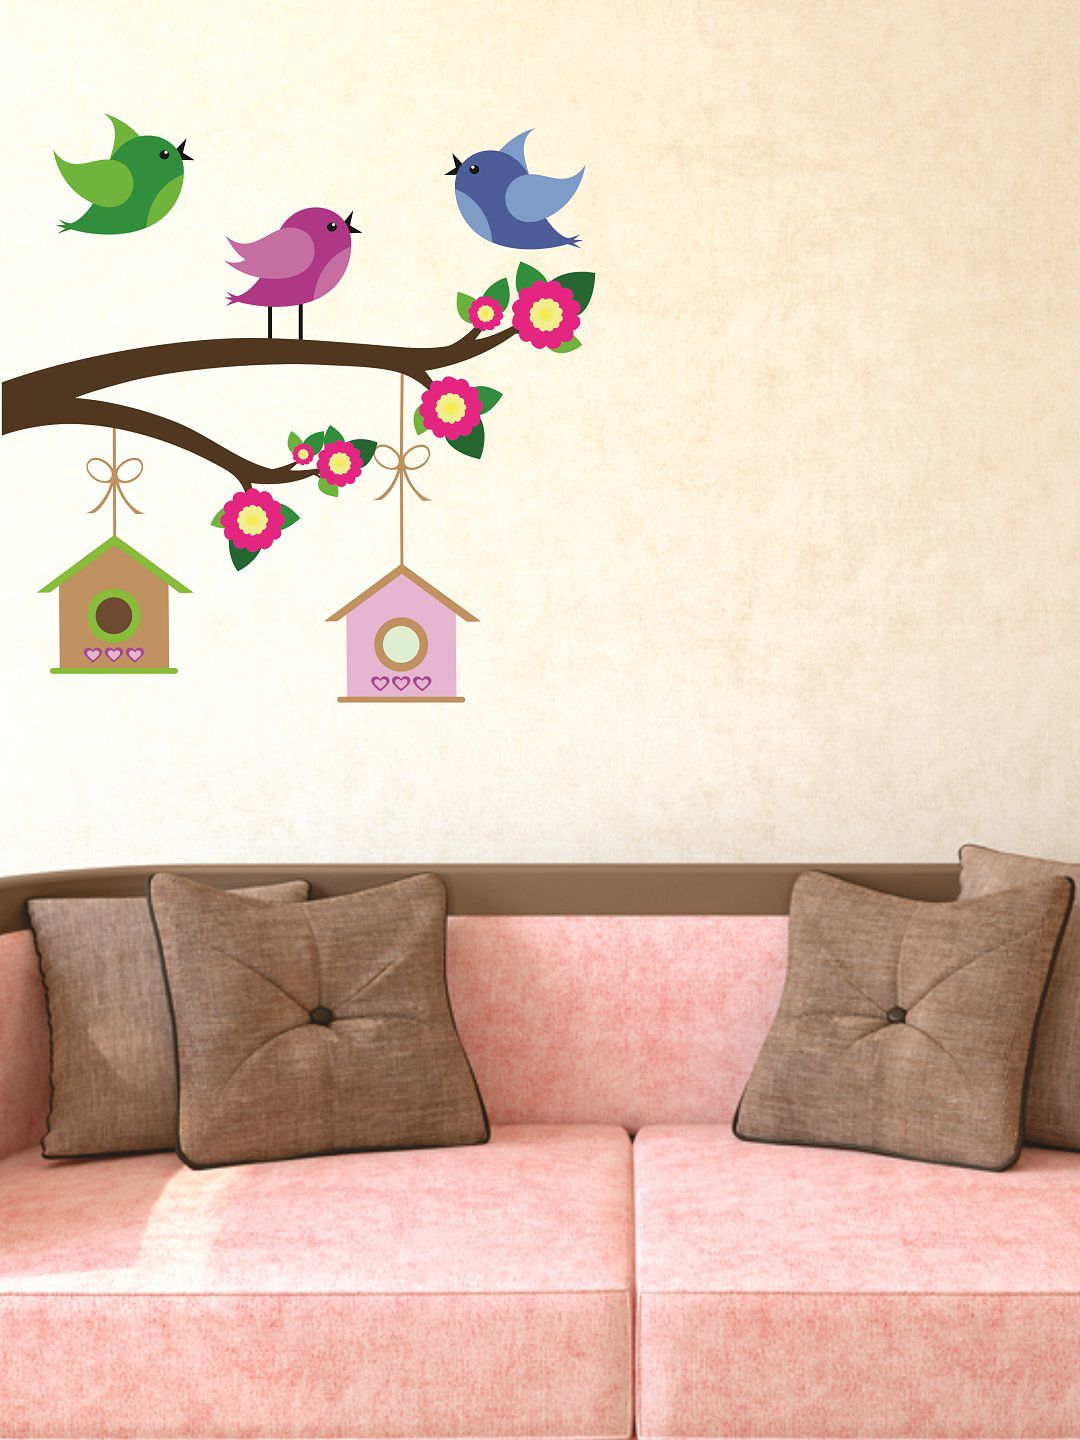 WALLSTICK Brown & Green Birds On The Tree Large Vinyl Wall Sticker Price in India